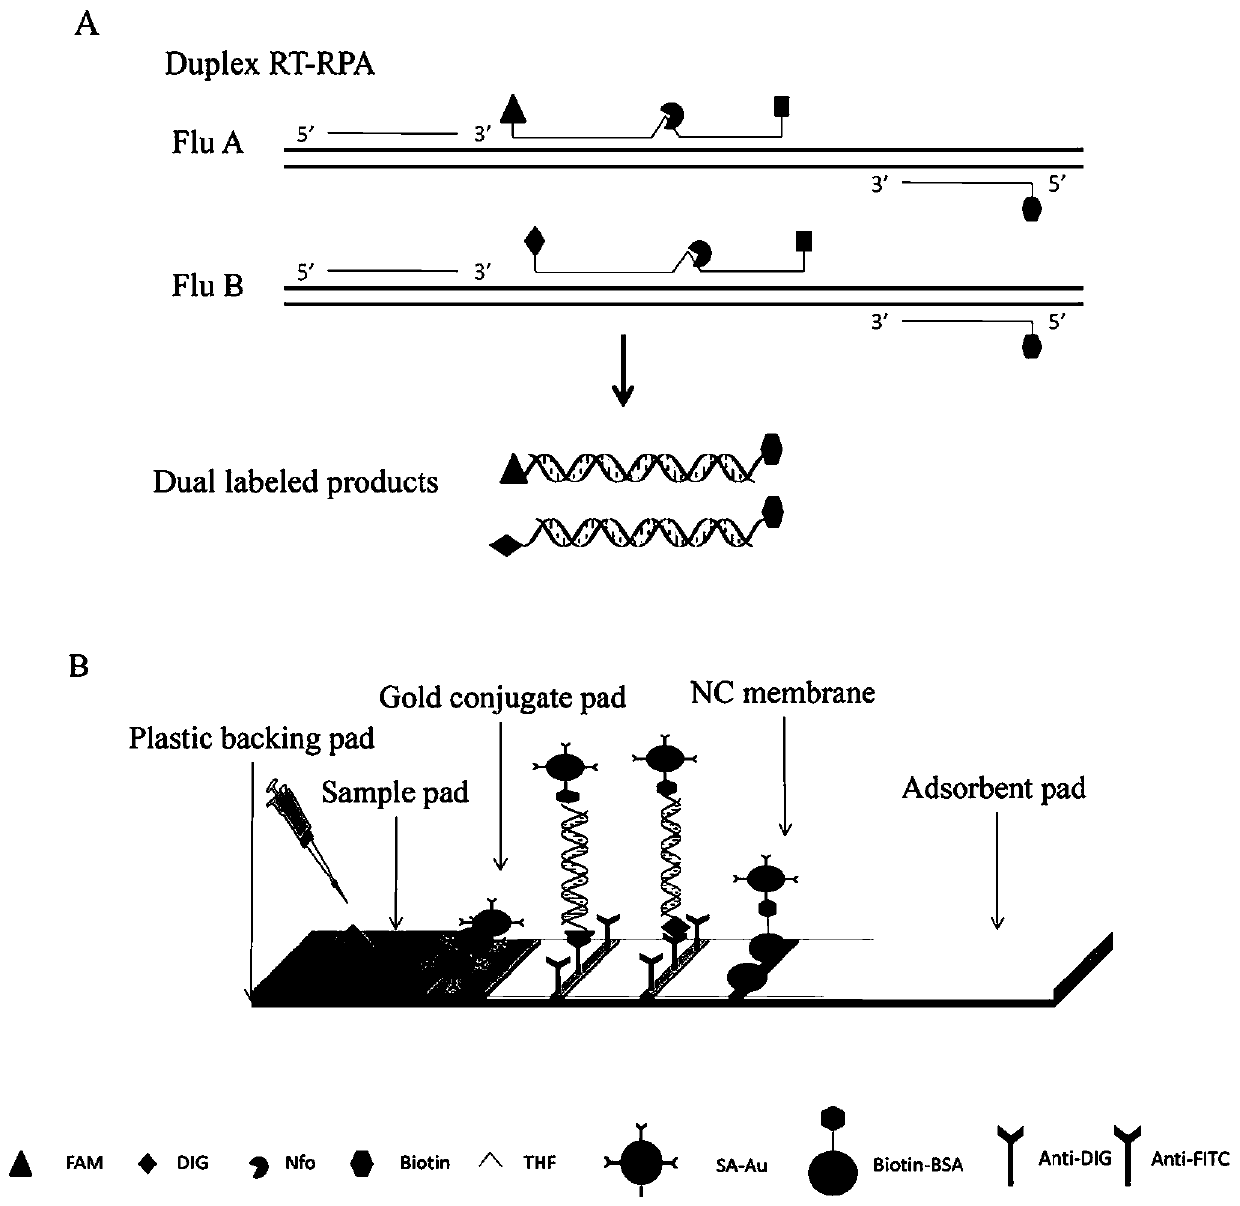 RPA (recombinase polymerase amplification) primer and RPA probe for detecting influenza B viruses, kit and application of RPA primer